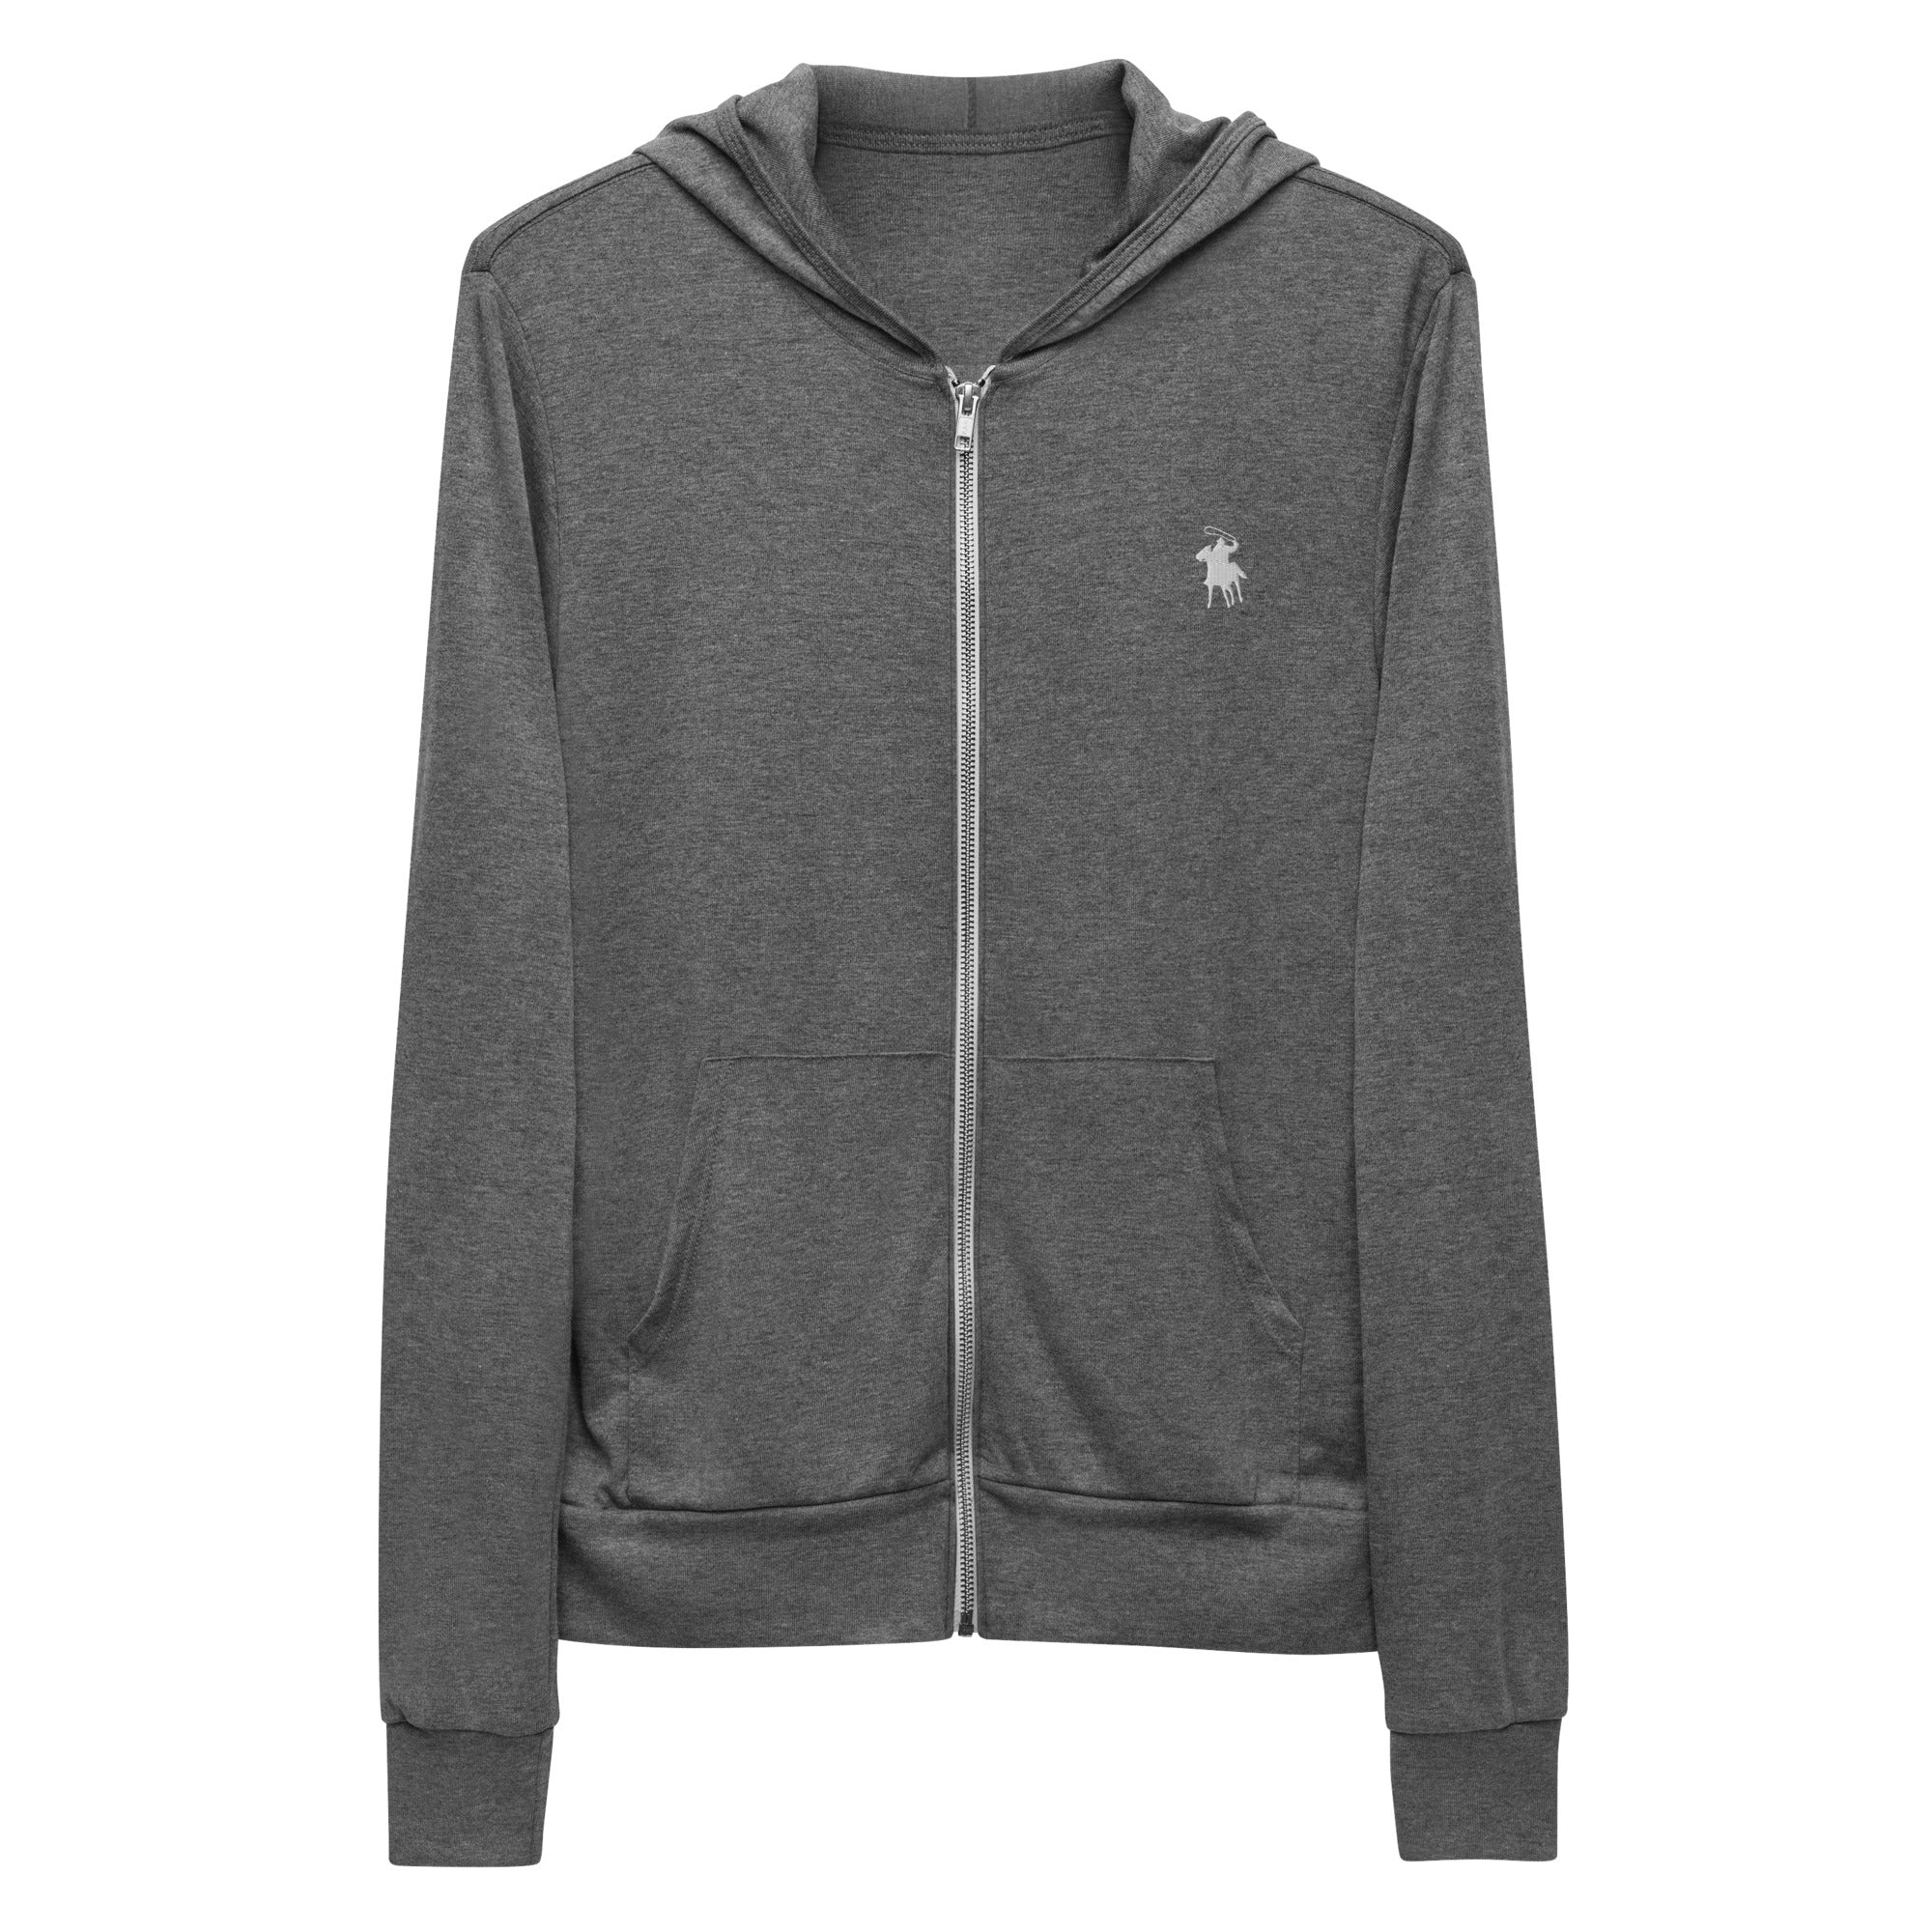 Country Polo Zip Hoodie